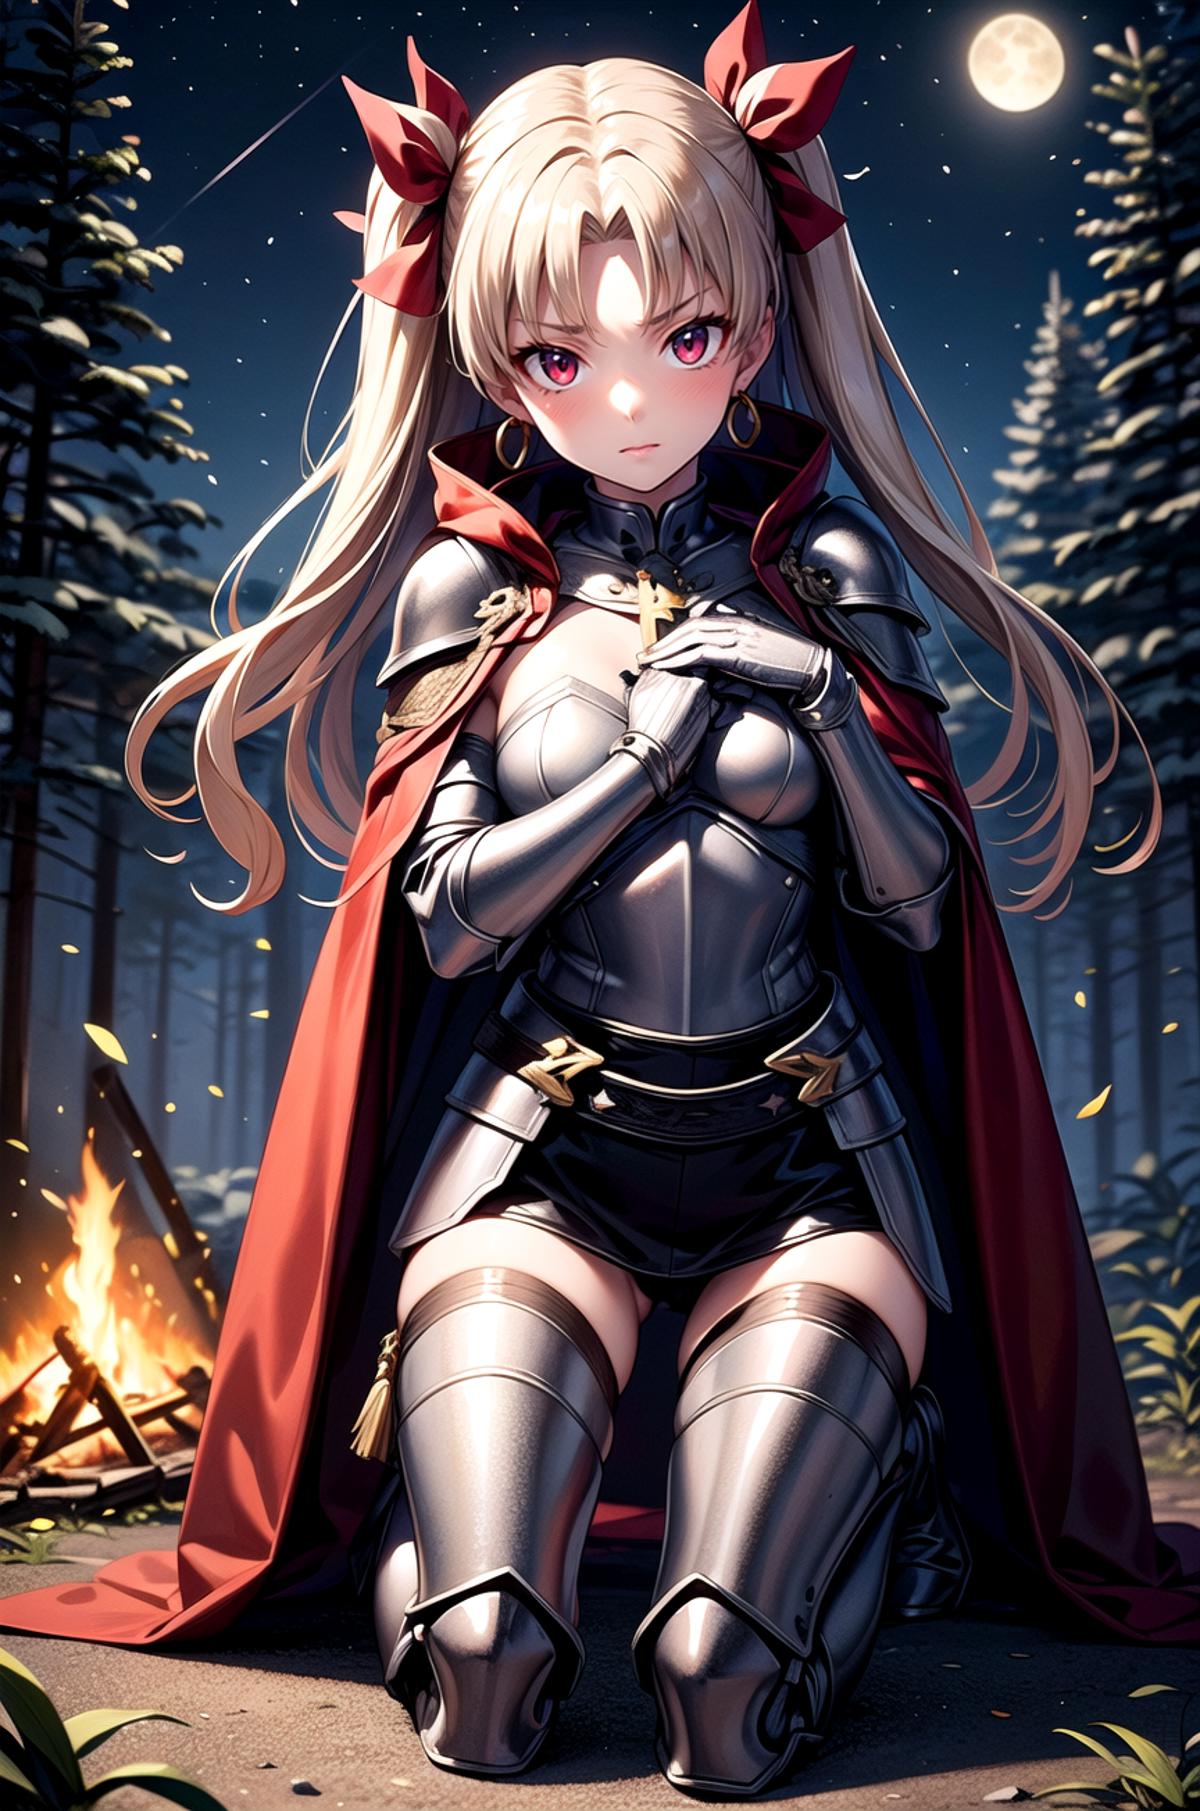 Ereshkigal (6 Outfits) | Fate/Grand Order image by Deto15